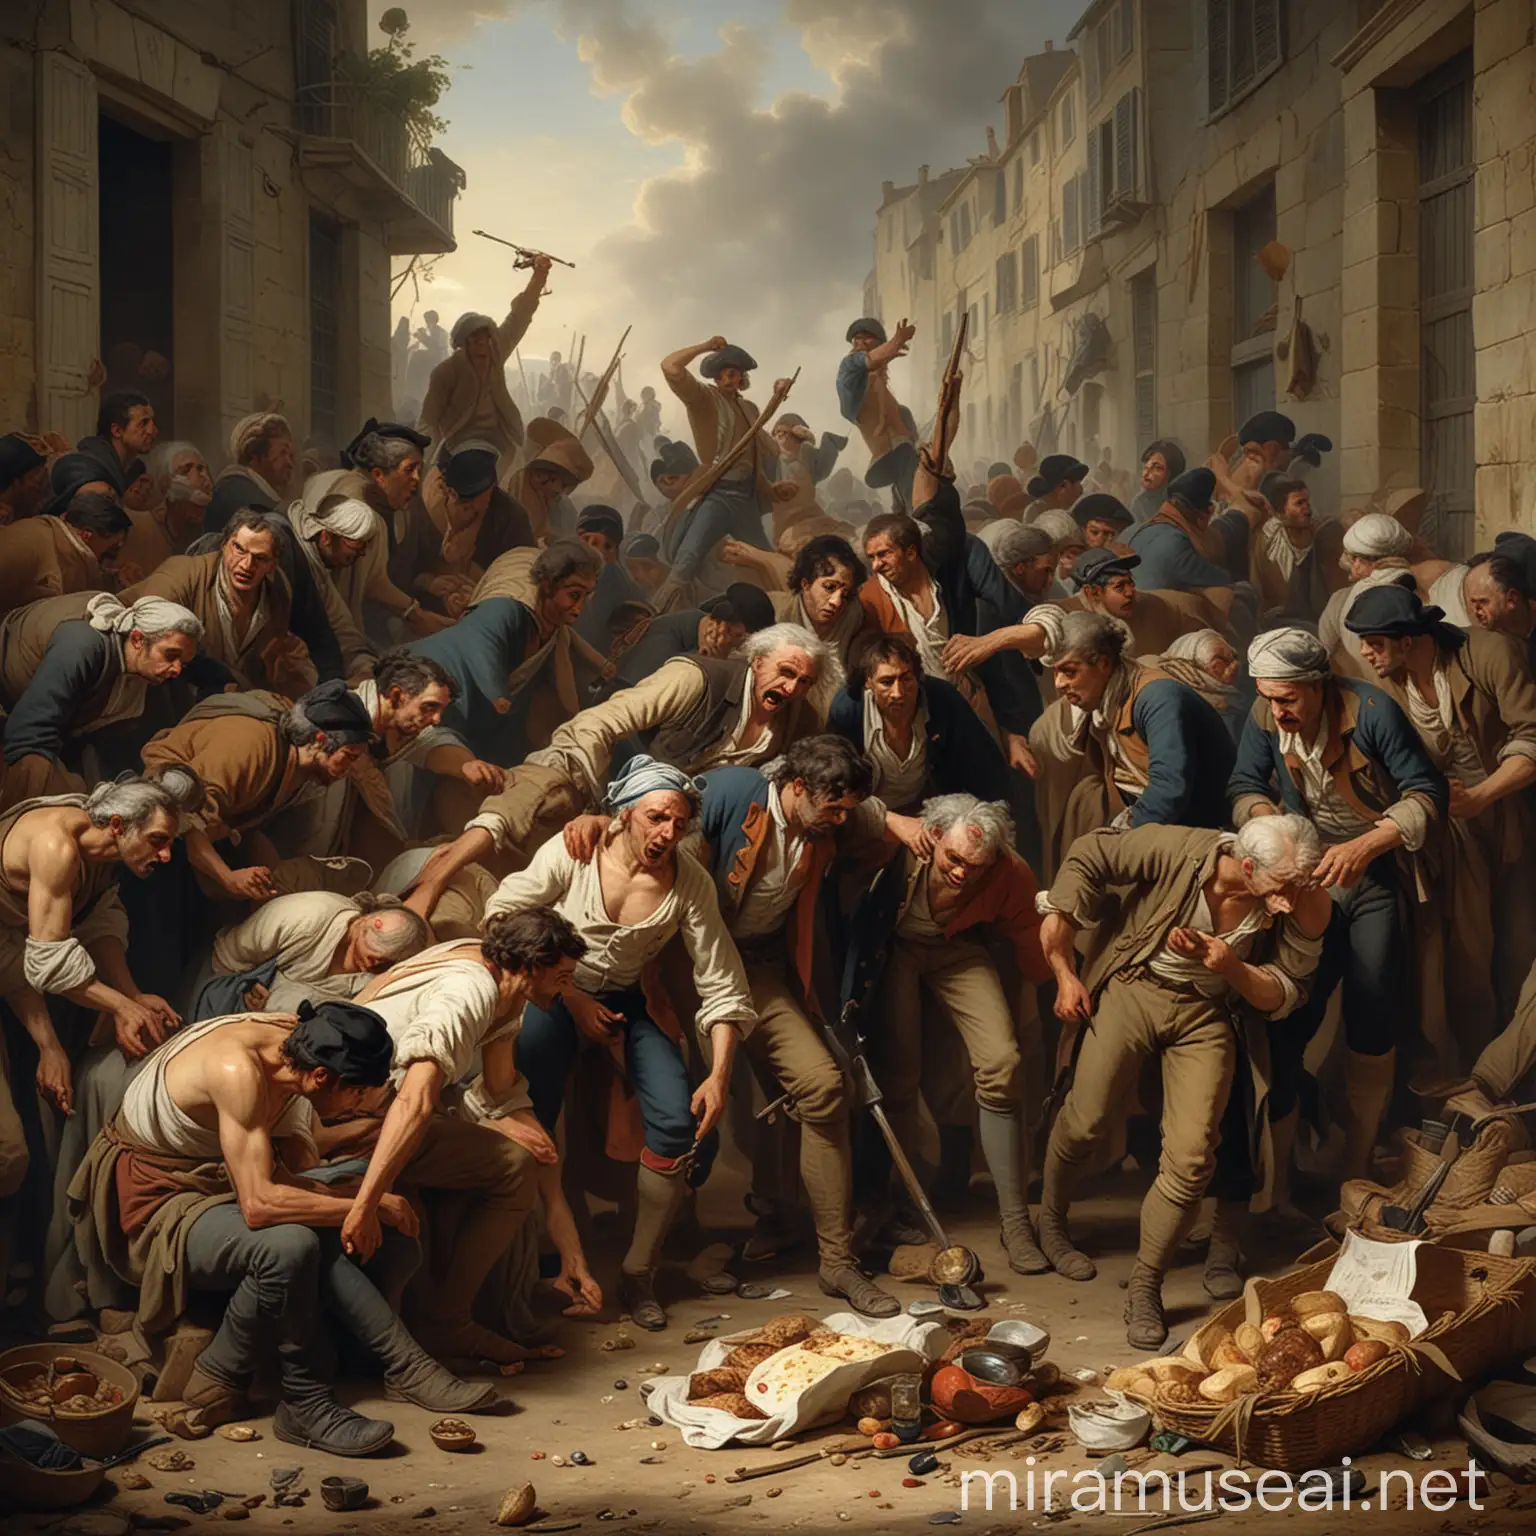 depiction of the struggle and desperation of starving people during the French Revolution